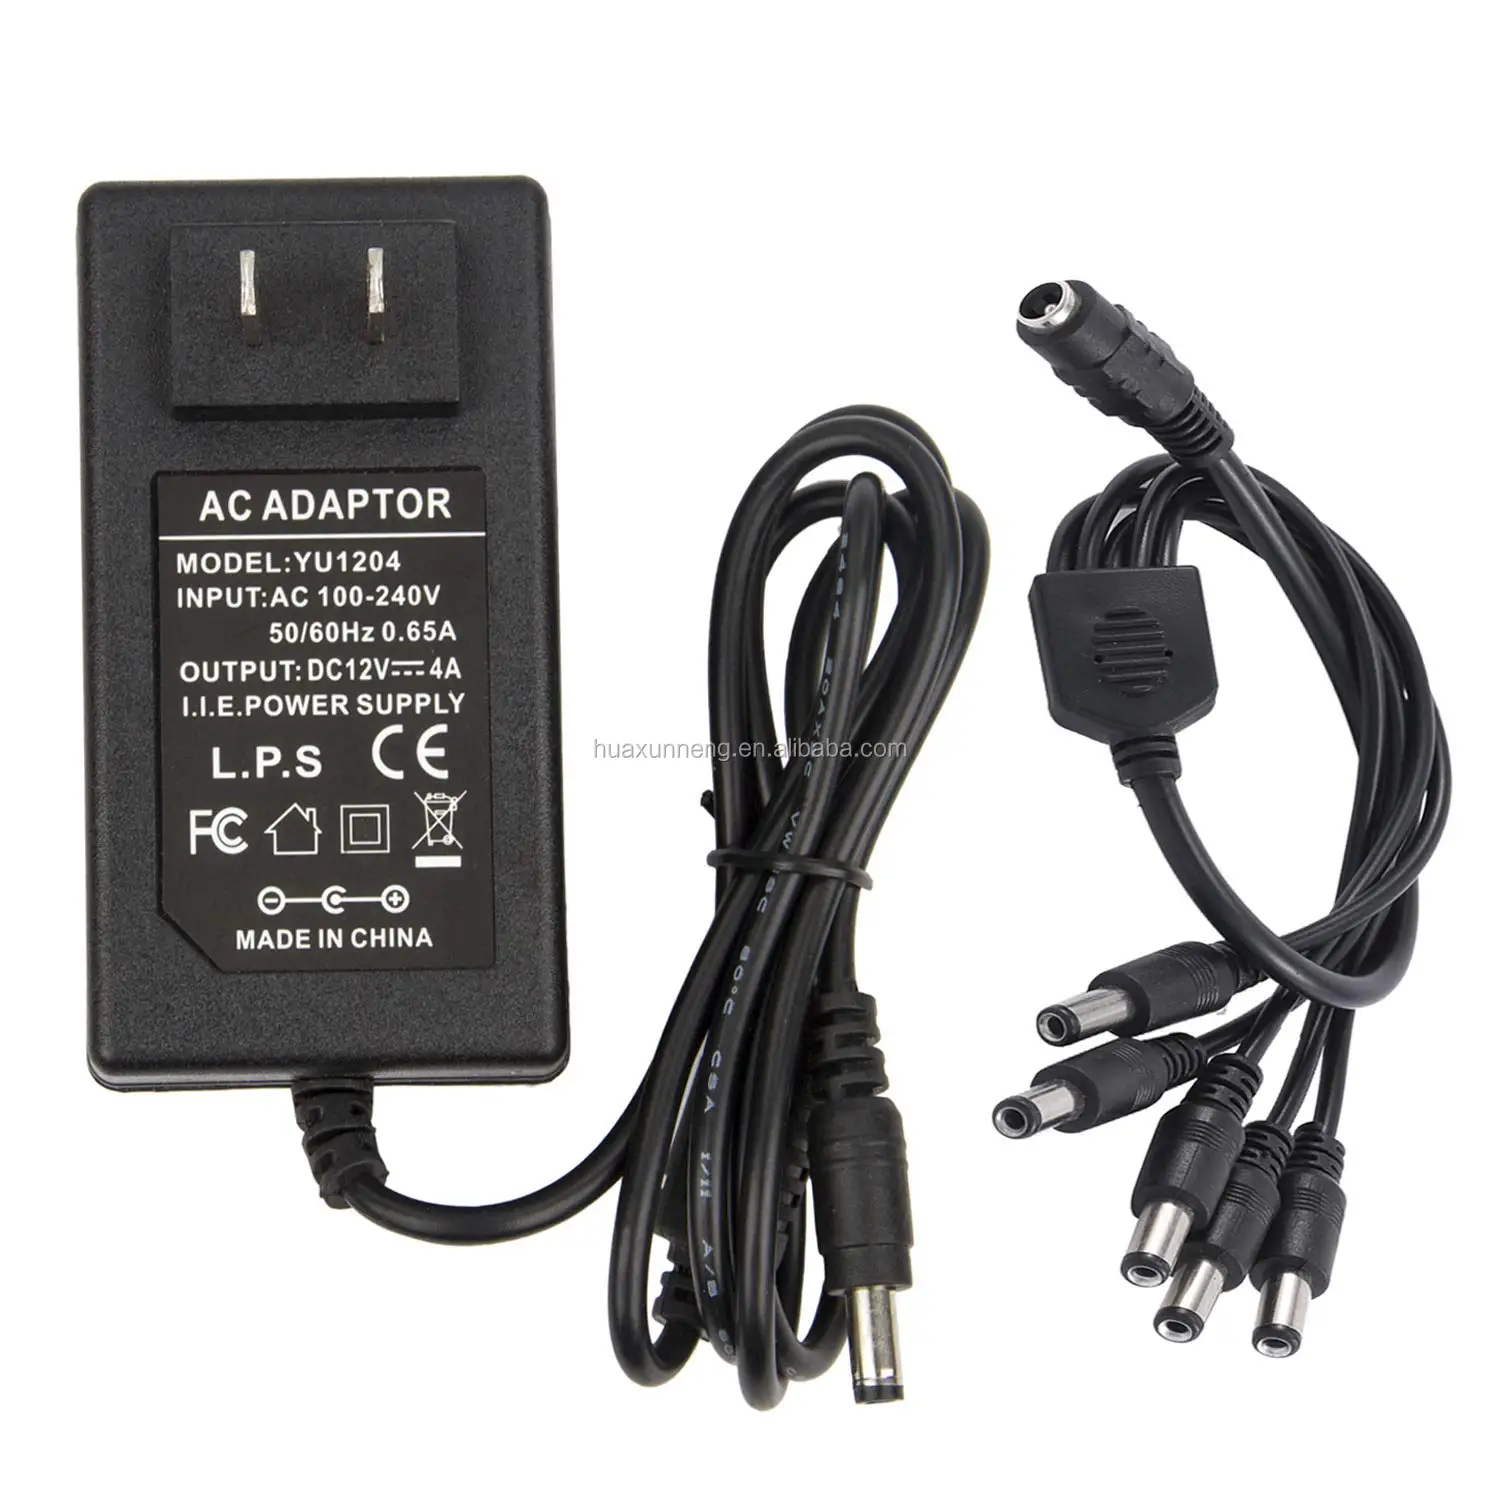 Maryanne Jones Indringing Leugen Ac/dc Adapter 12v 4a 48w Power Adapter 12v 4a 48w Power Supply With 5-way  Splitter Power Cable - Buy Ac/dc Adapter 12v 4a 48w,12v 4a 48w Power Adapter ,12v 4a 48w Power Supply